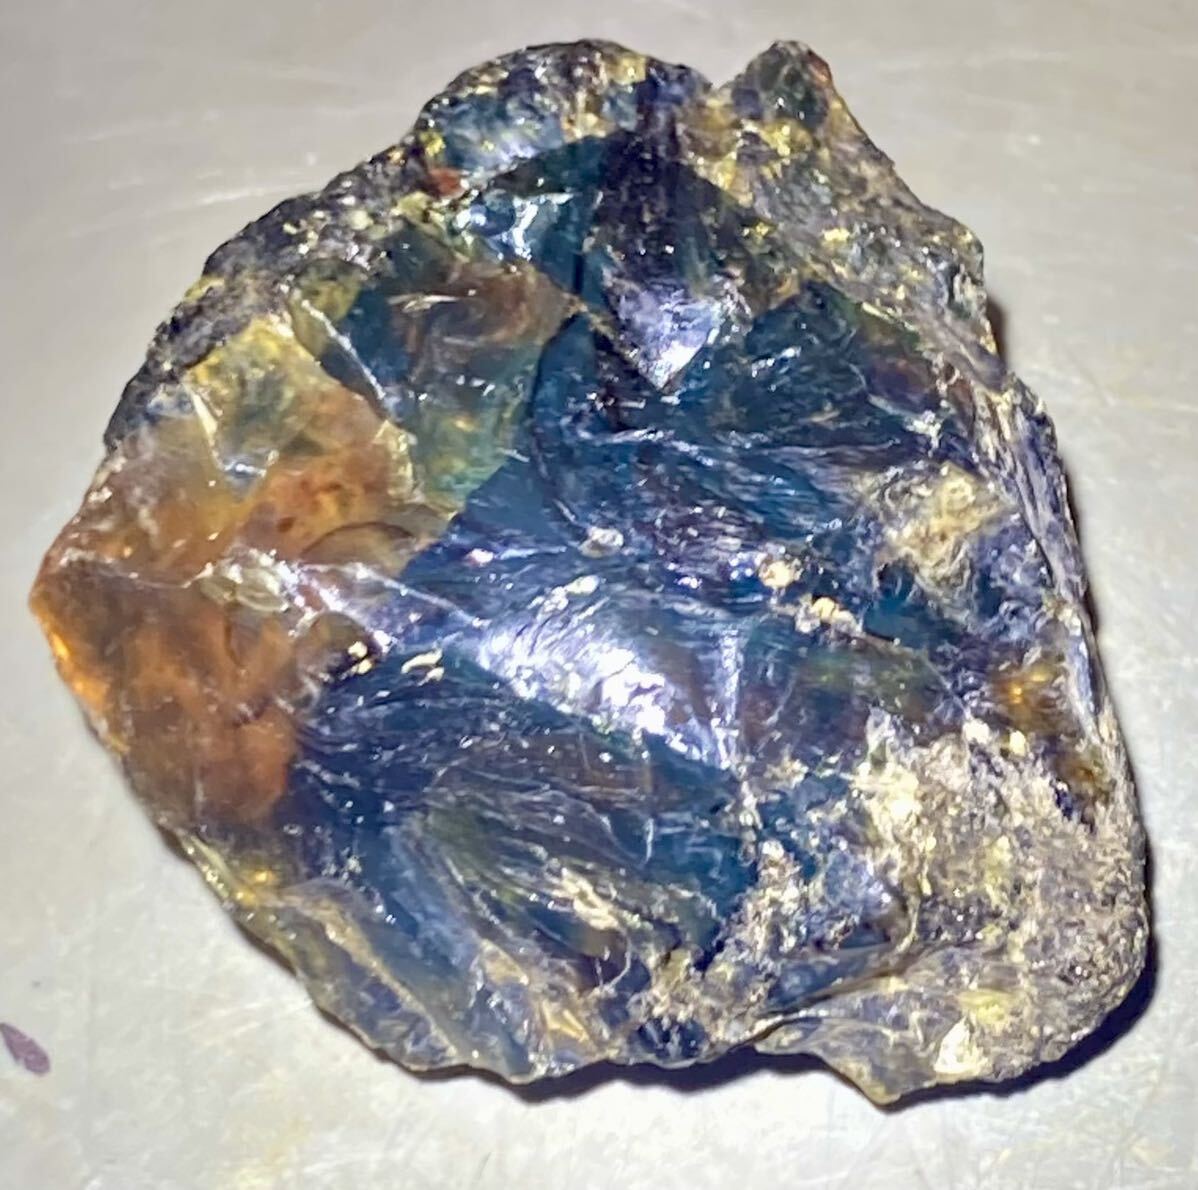  Indonesia sma tiger island production natural blue amber raw ore 35.90g beautiful ^ ^